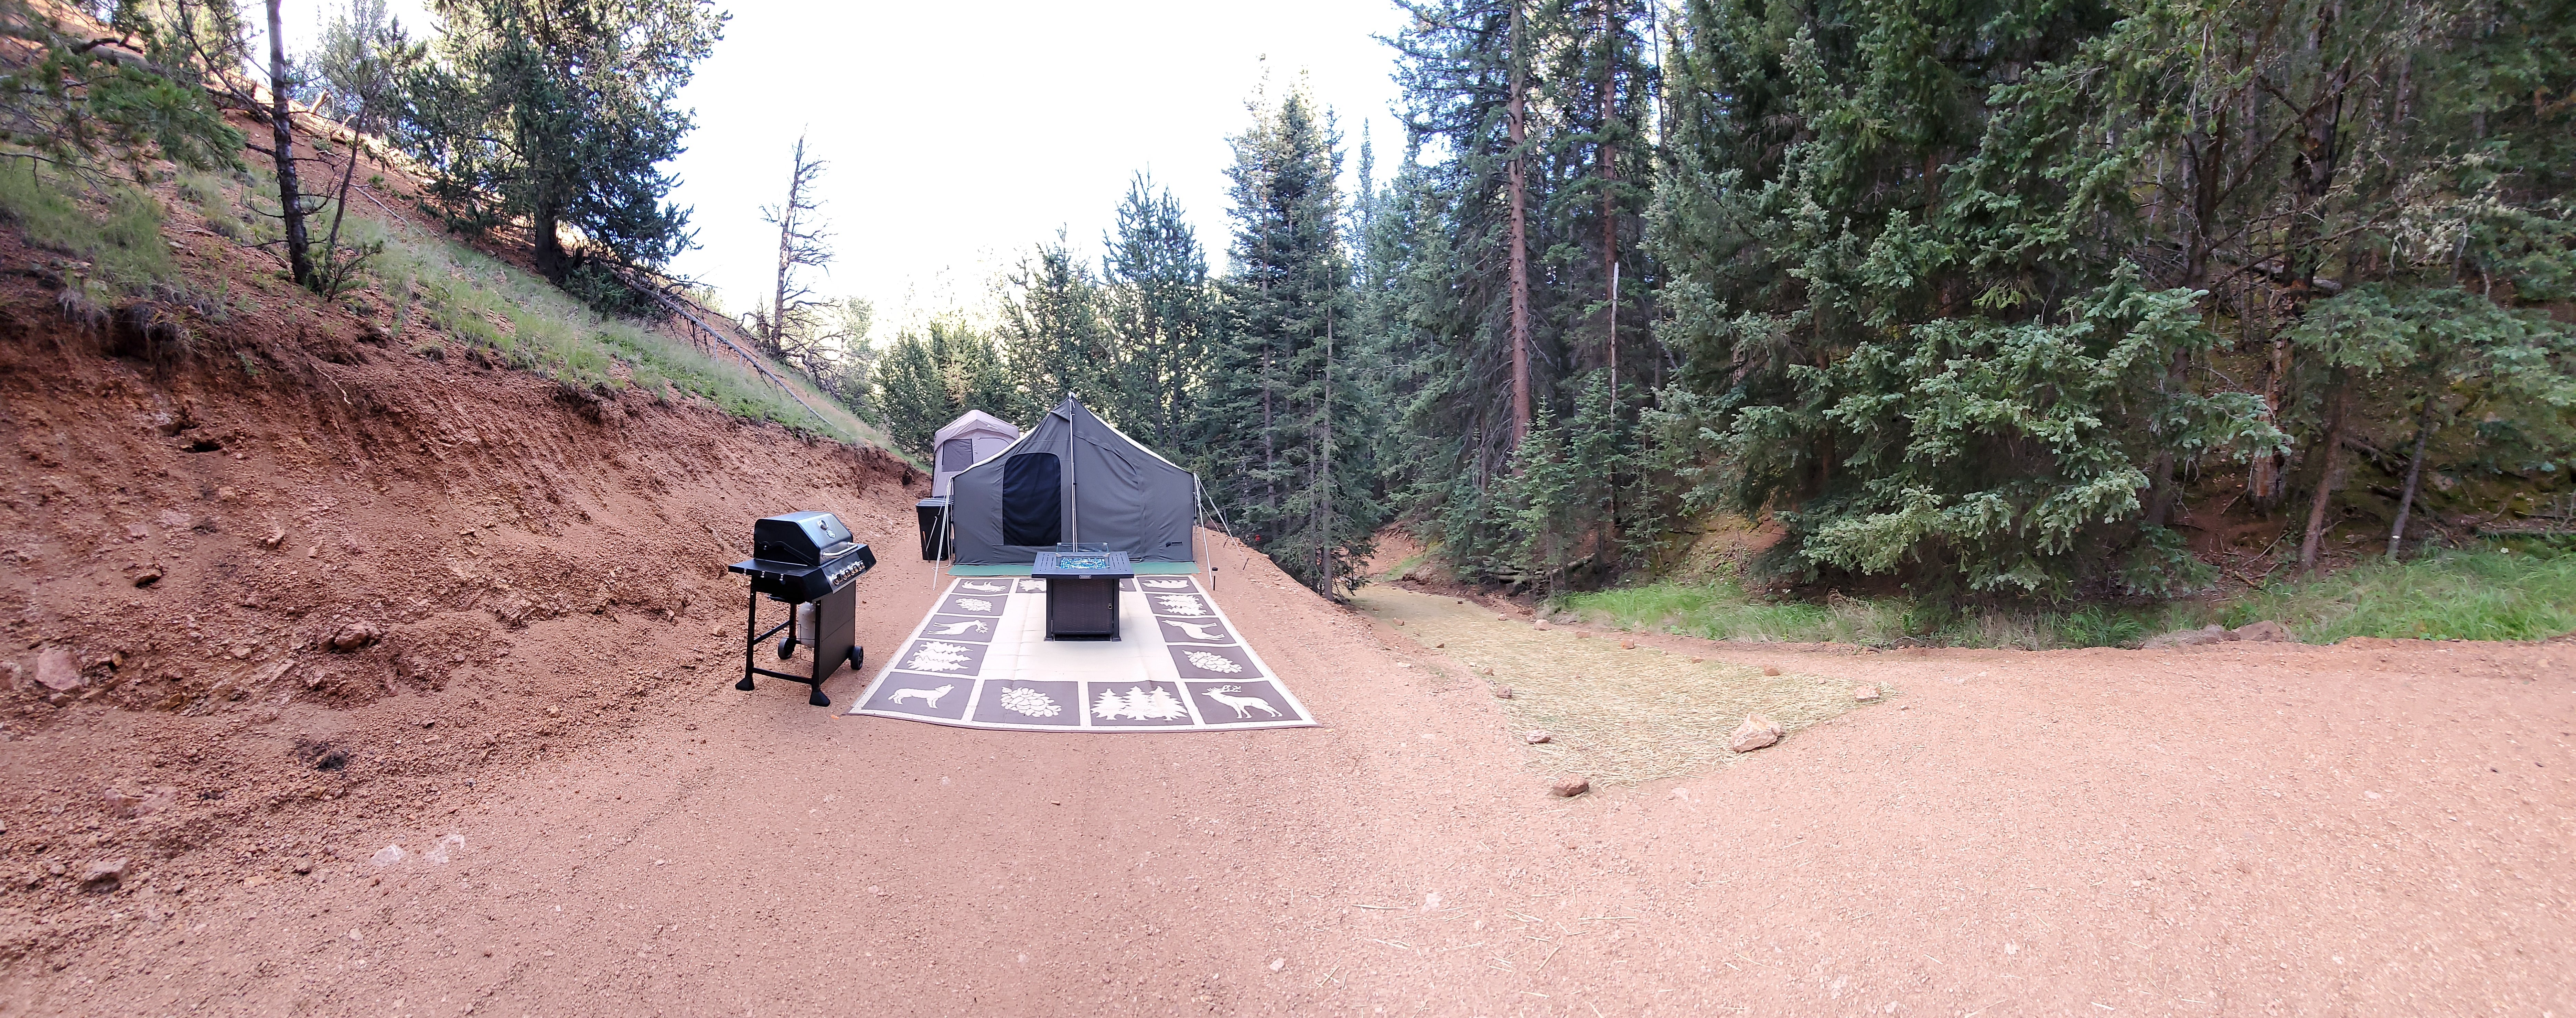 Camper submitted image from "Glamping" Pike's Peak Camping Spot- Reservation Only Site - 1